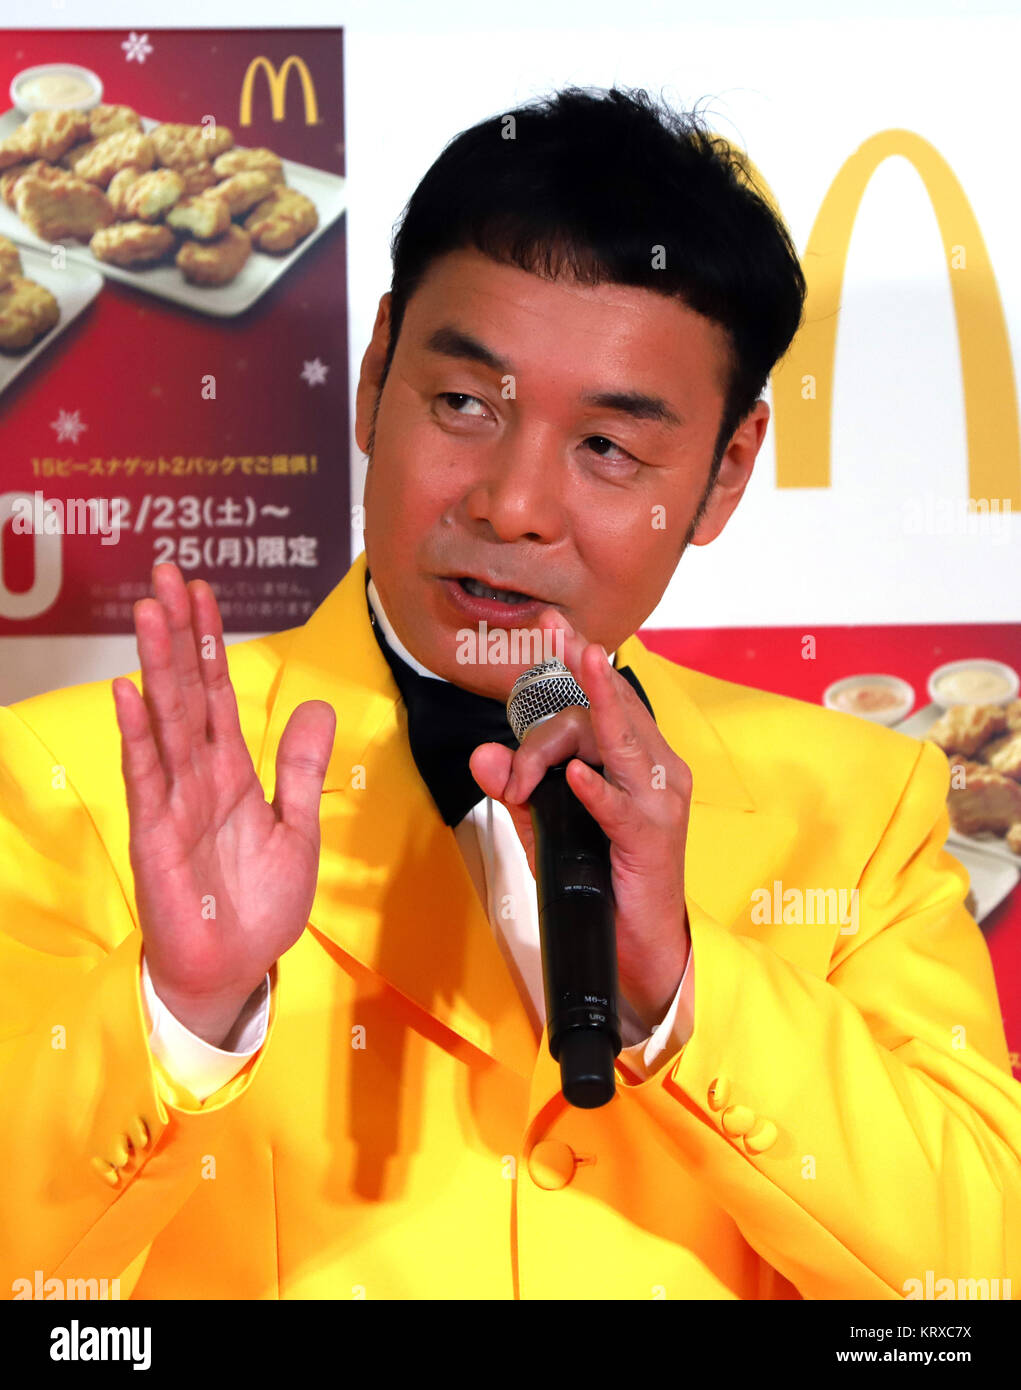 Tokyo, Japan. 21st Dec, 2017. Japan's comedy trio Dacho-Club member Katsuhiro Higo attends a promotional event of McDonald's Japan's Chicken McNuggets in Tokyo on Thursday, December 21, 2017. McDonald's Japan will have a campaign for their Chicken McNuggets with a discount price and special flabored dipping saurces. Credit: Yoshio Tsunoda/AFLO/Alamy Live News Stock Photo